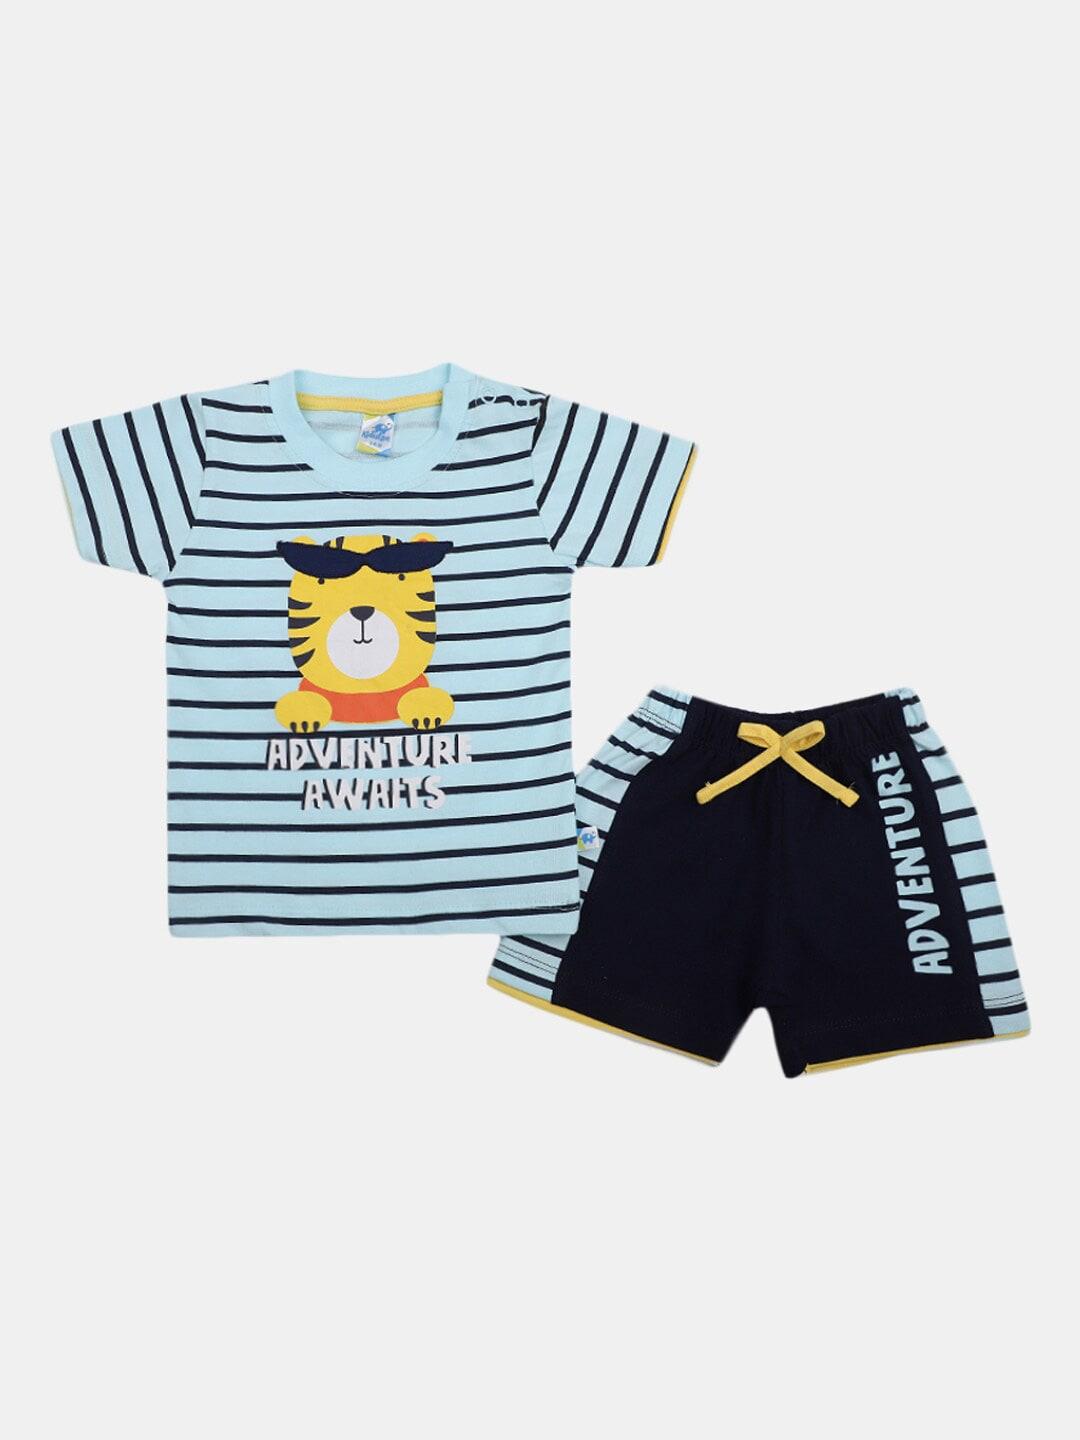 V-Mart Infants Striped Pure Cotton T-shirt With Shorts Clothing Set